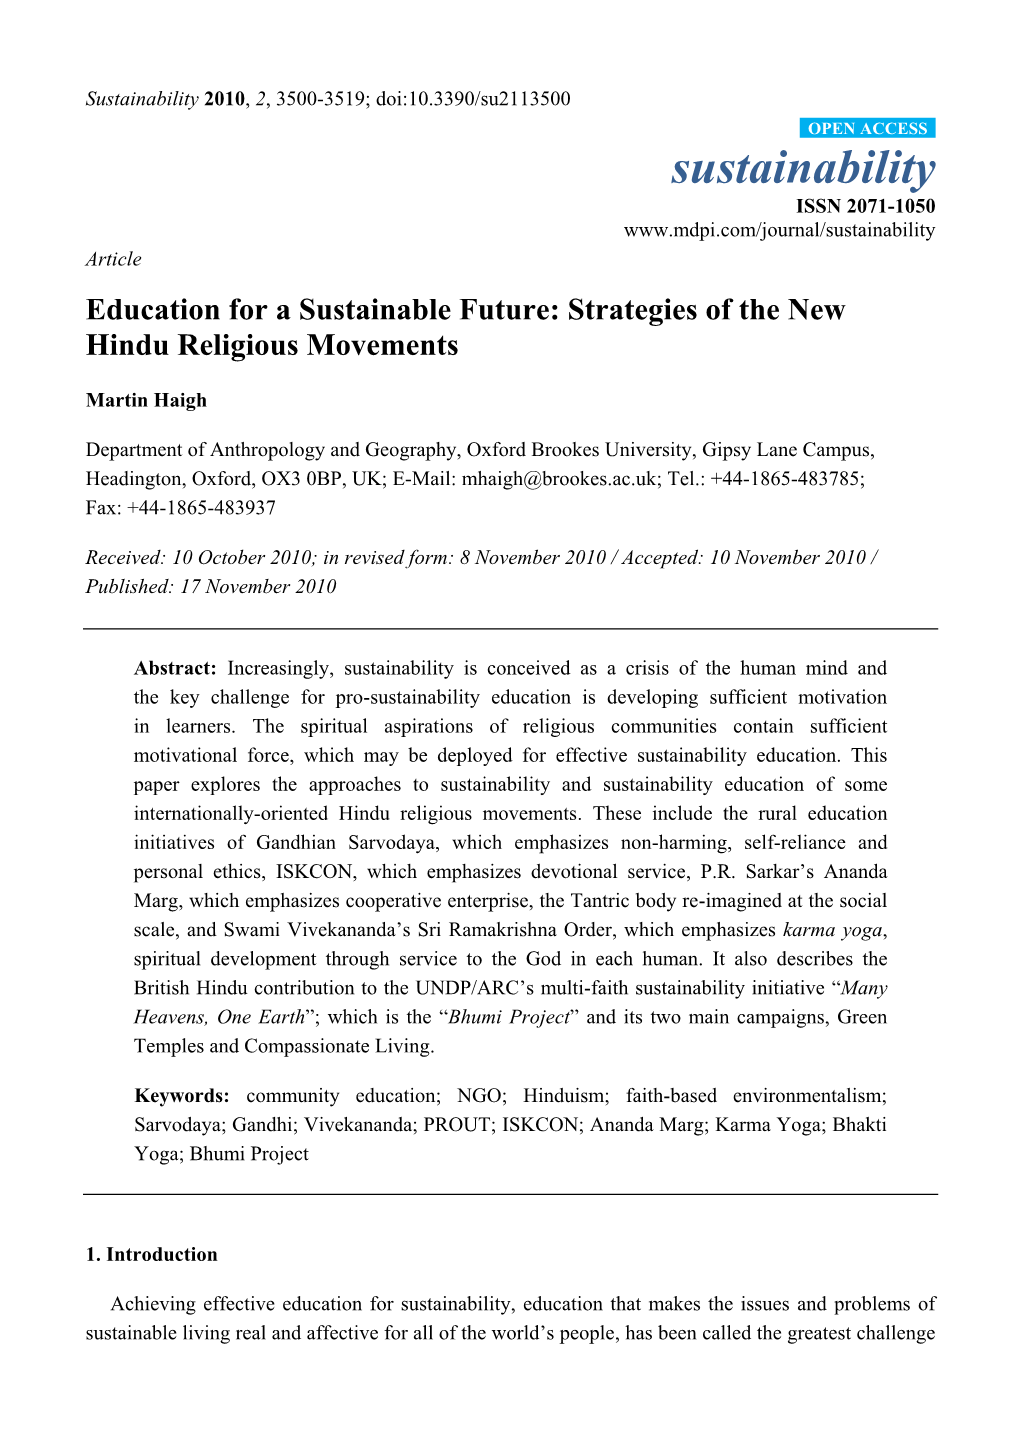 Education for a Sustainable Future: Strategies of the New Hindu Religious Movements